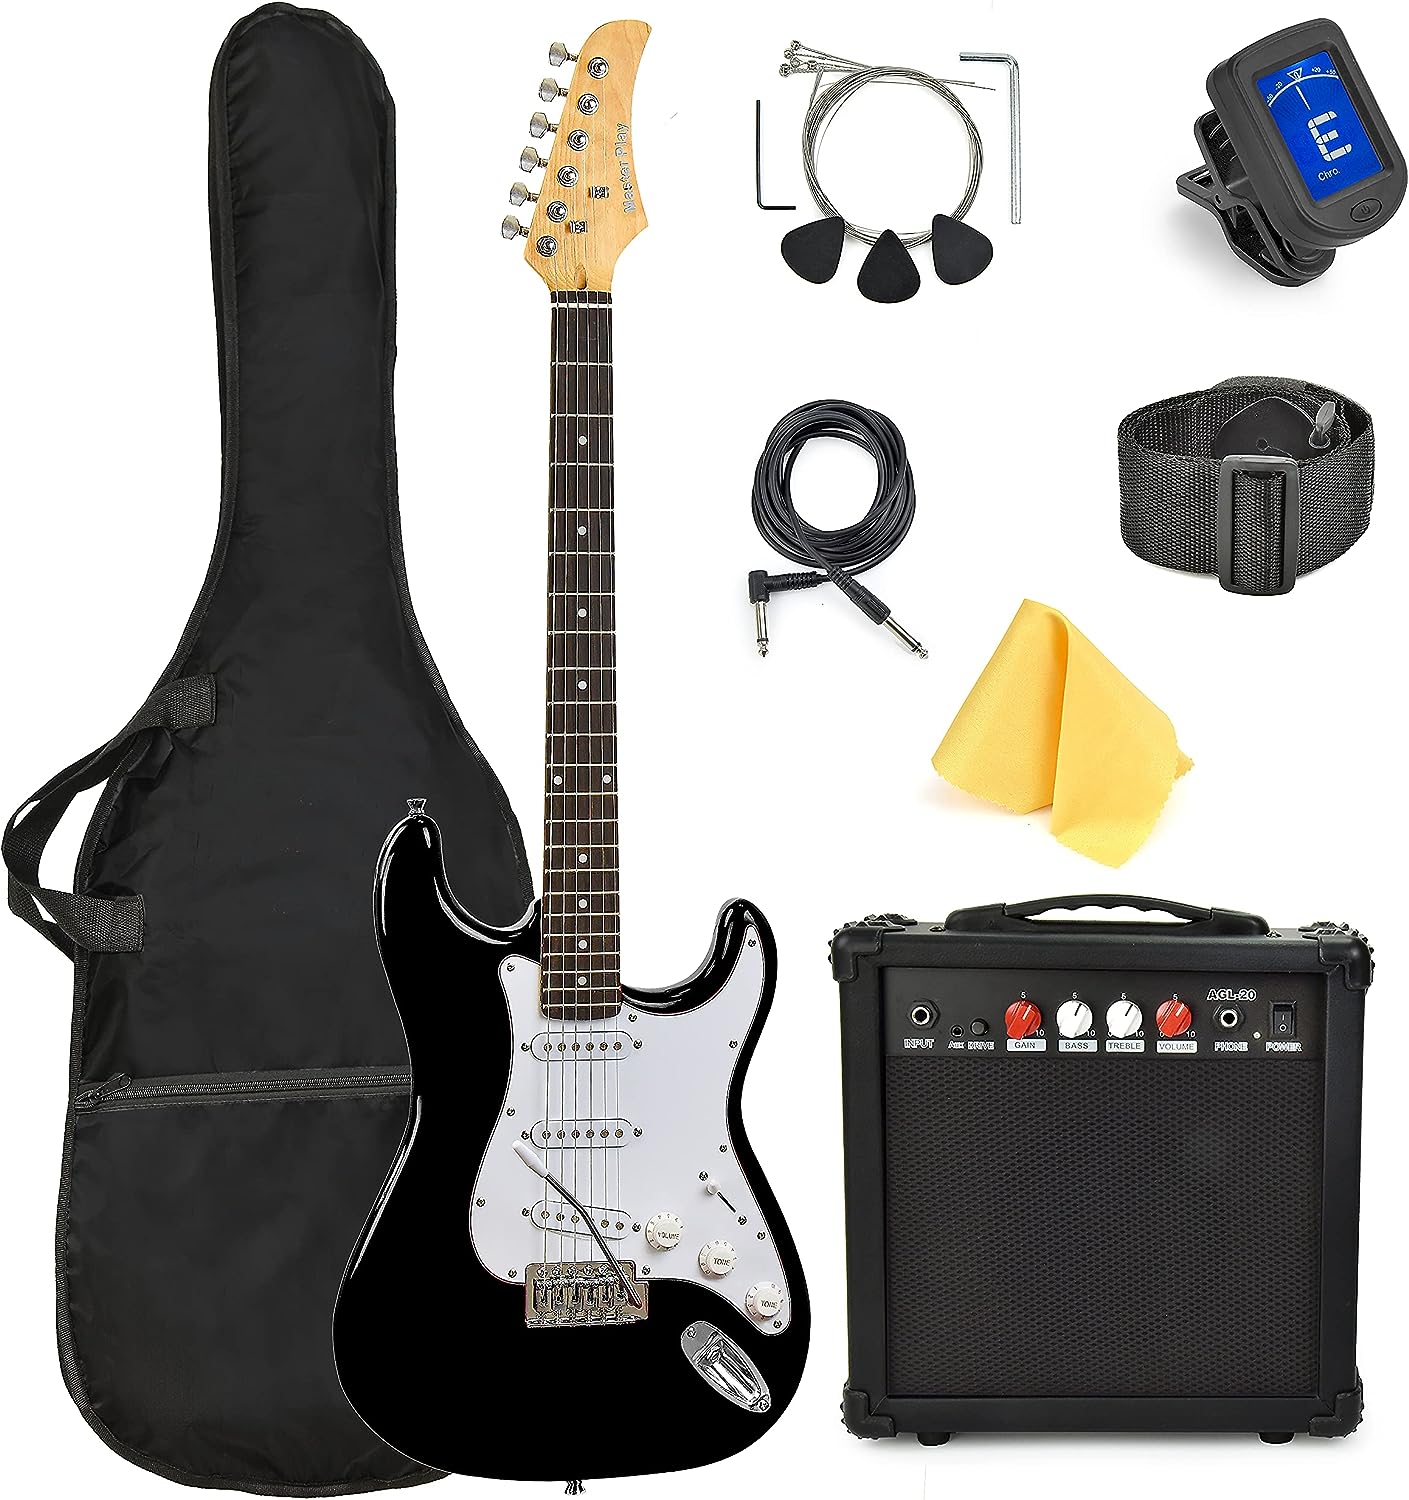 Master Play 39 Inch Electric Guitar With Complete Starter Kit on a white background